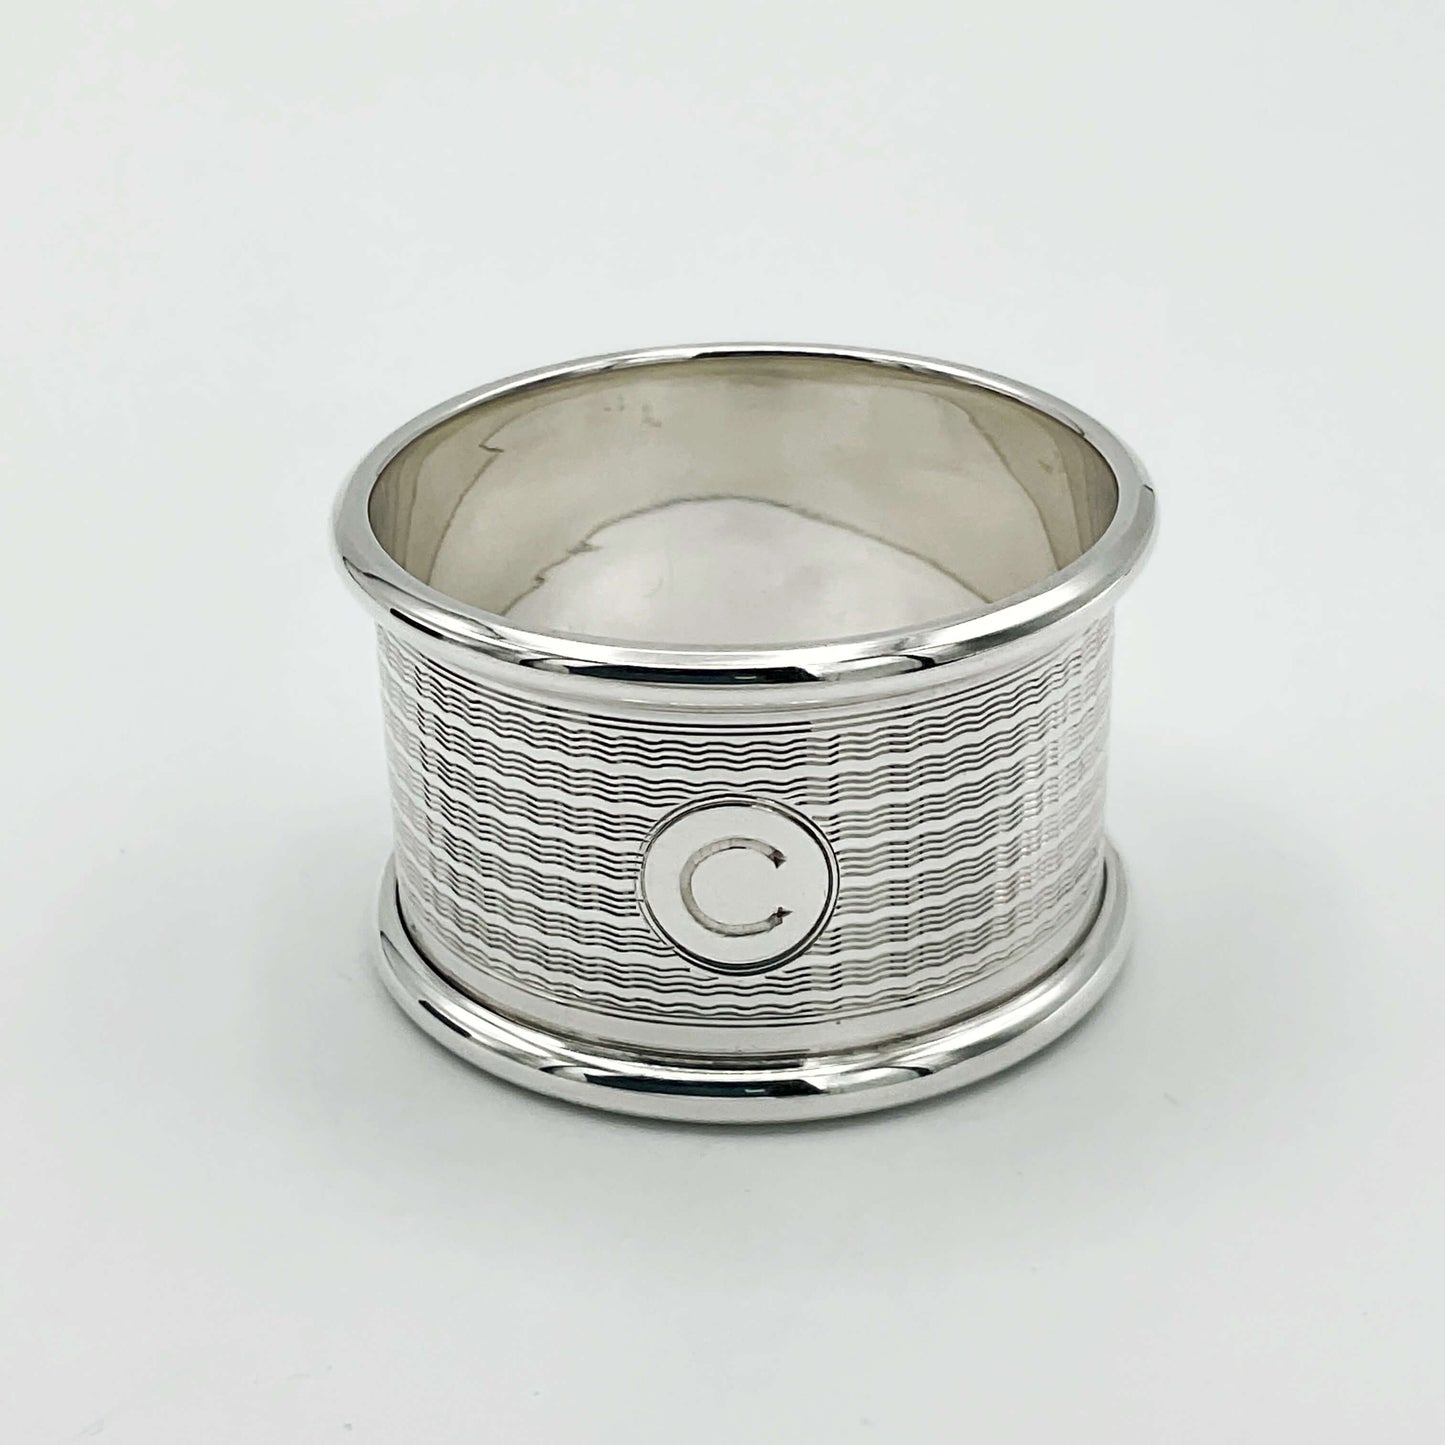 Vintage silver napkin ring with C in the centre on a plain background.